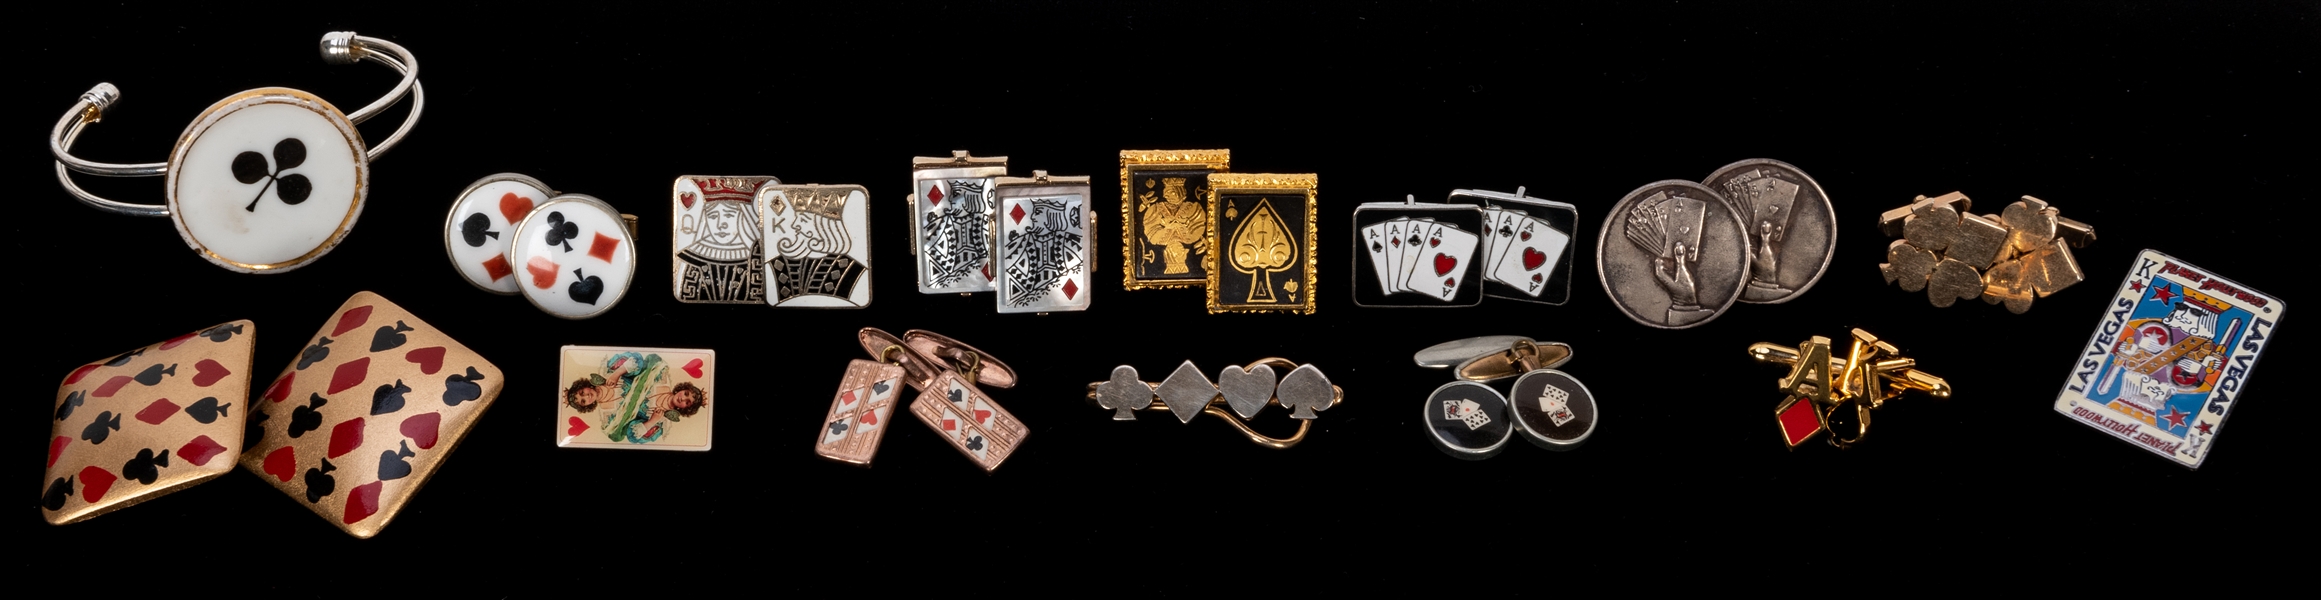  Miscellaneous Playing Card and Gambling-themed Jewelry.